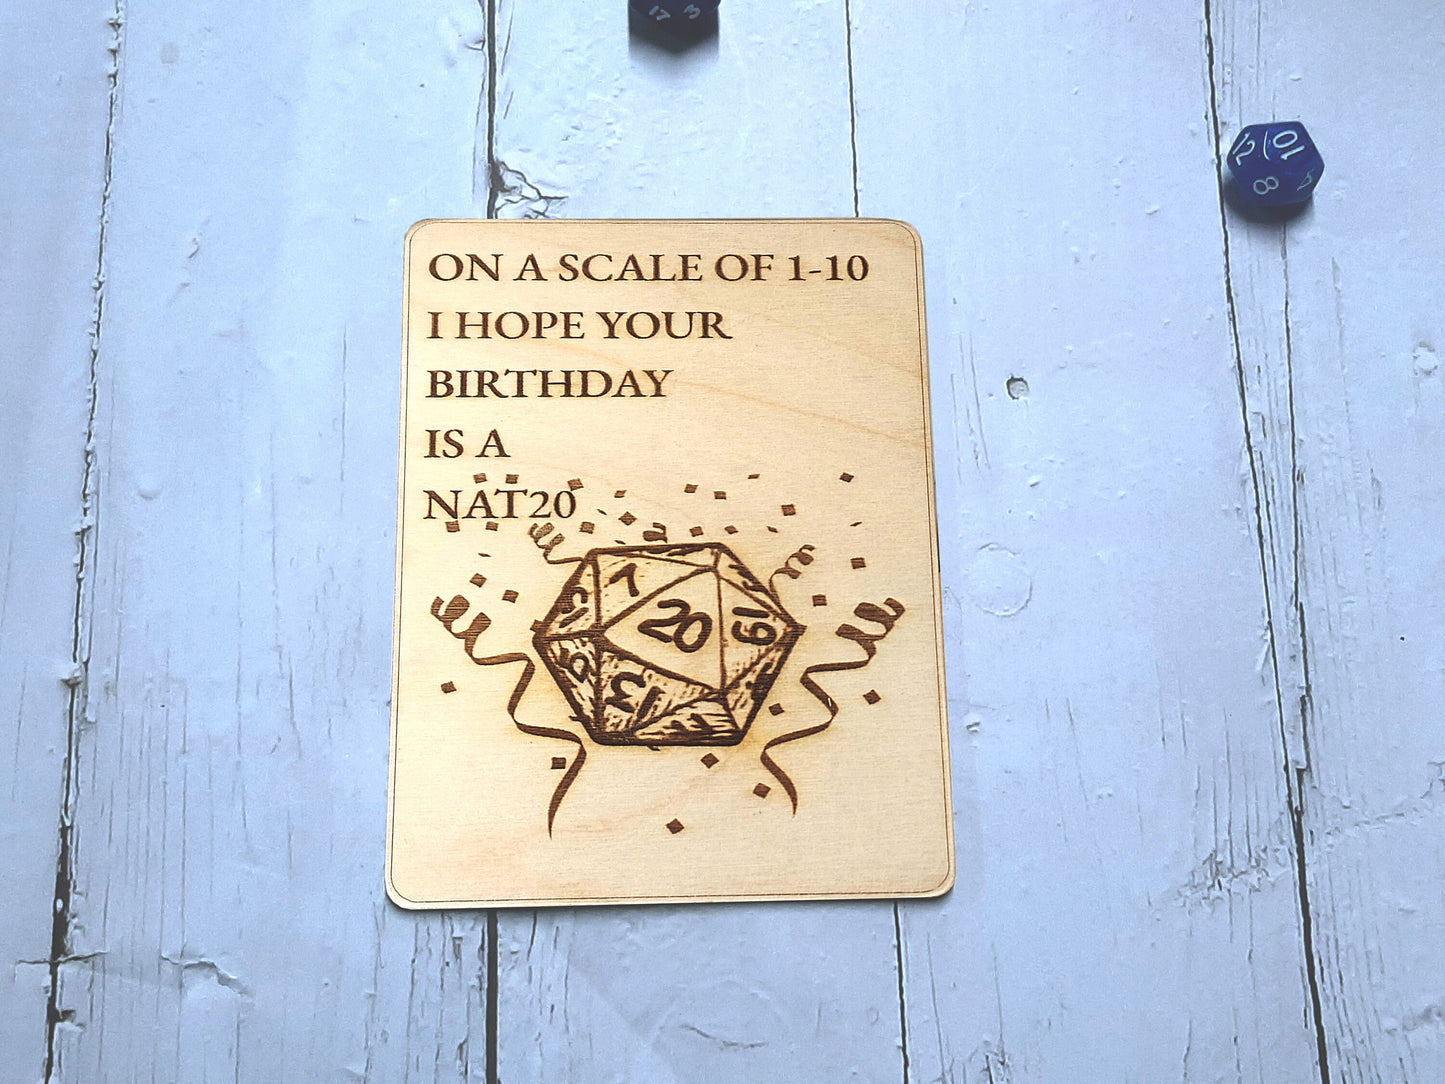 NAT 20 - Birthday Card - Adventurous birthday card, engraved wood, rpg gamer gift, role-playing games d&d dnd